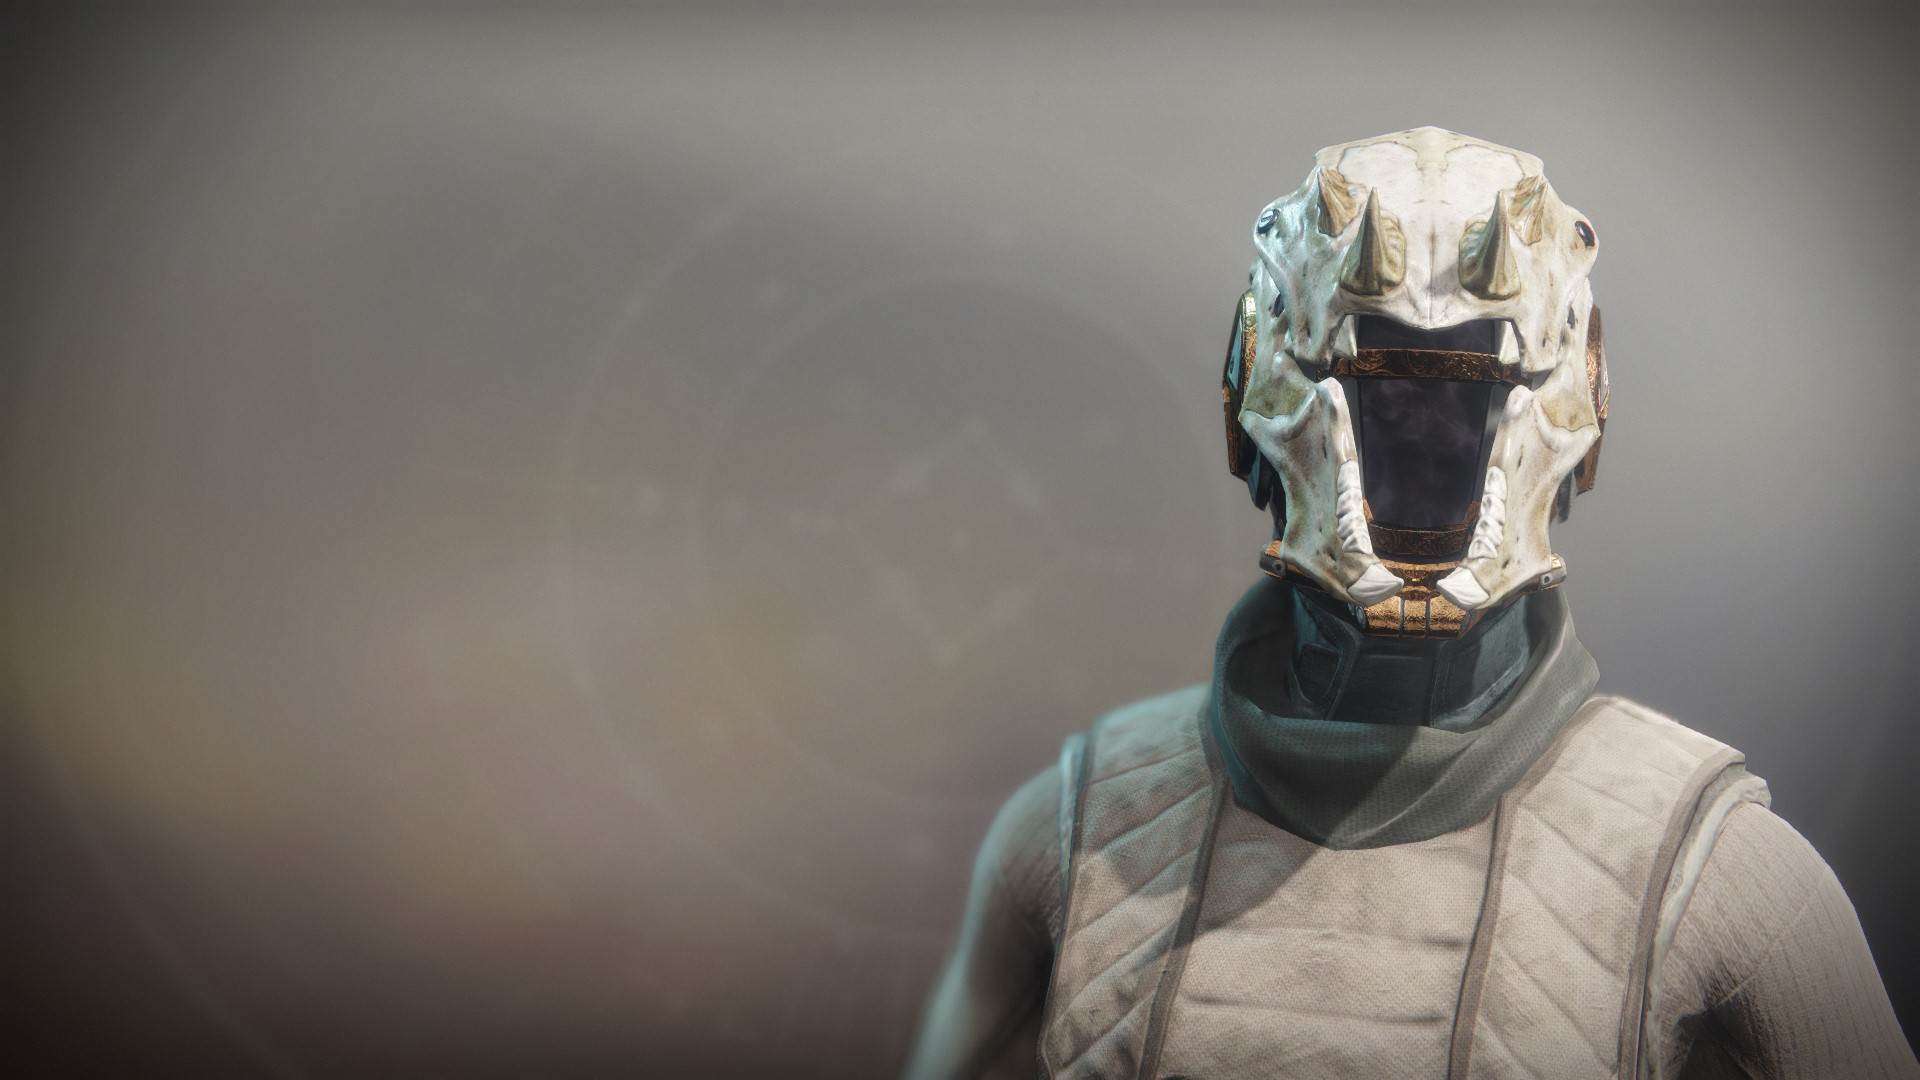 Skull of Dire Ahamkara - A Warlock helmet that enhances Nova Bomb, increasing super energy gained from kills and restoring abilities.
Gwisin Vest - A Hunter chest armor that extends Spectral Blades duration and refunds super energy on successful kills.